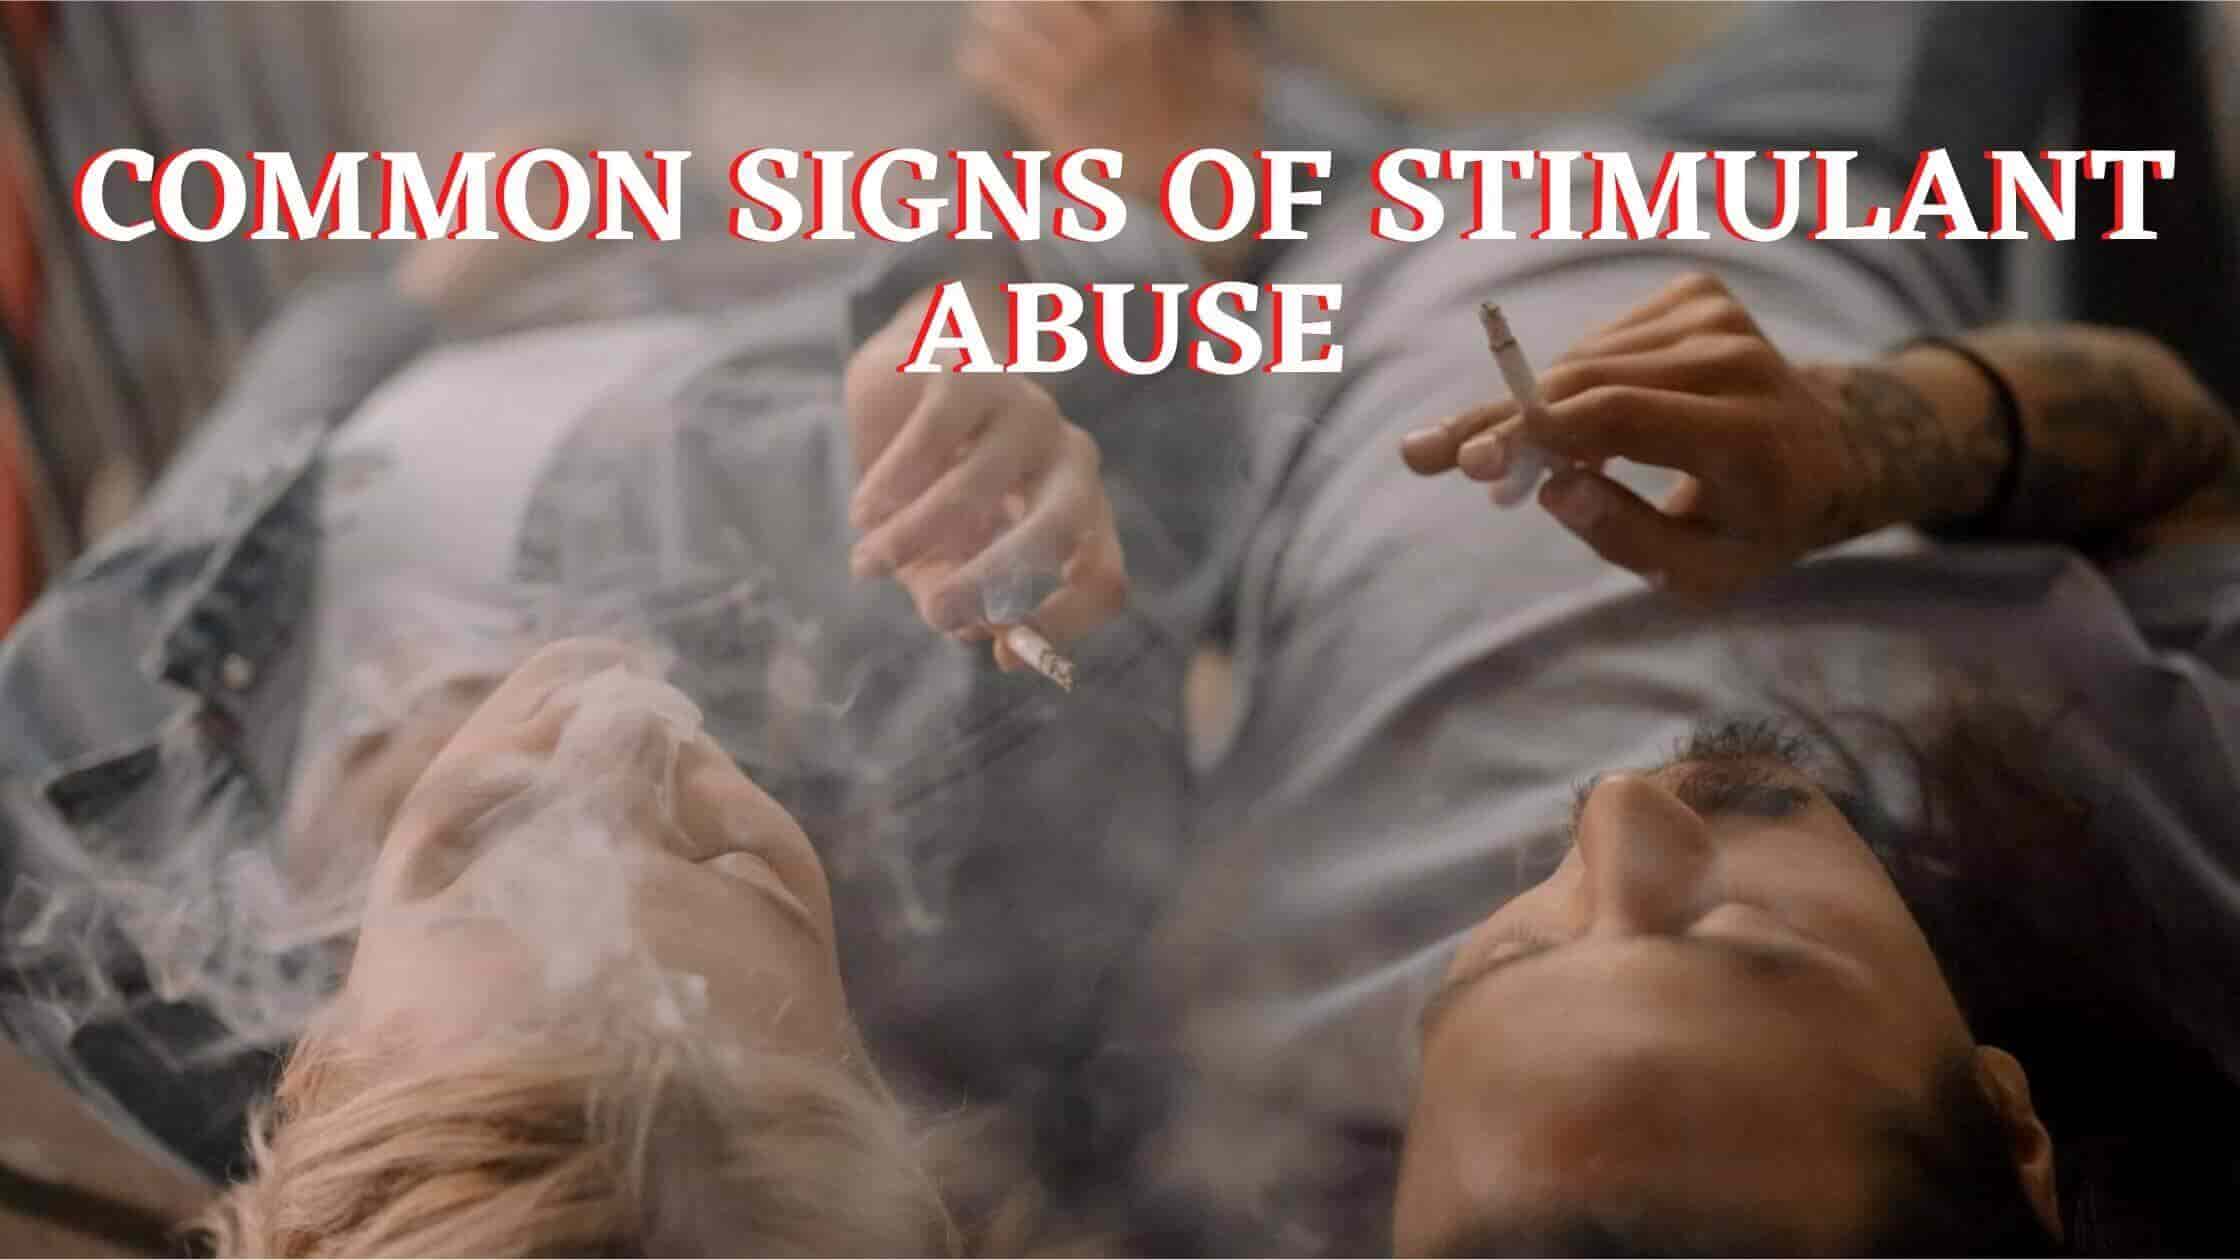 Common signs of Stimulant Abuse